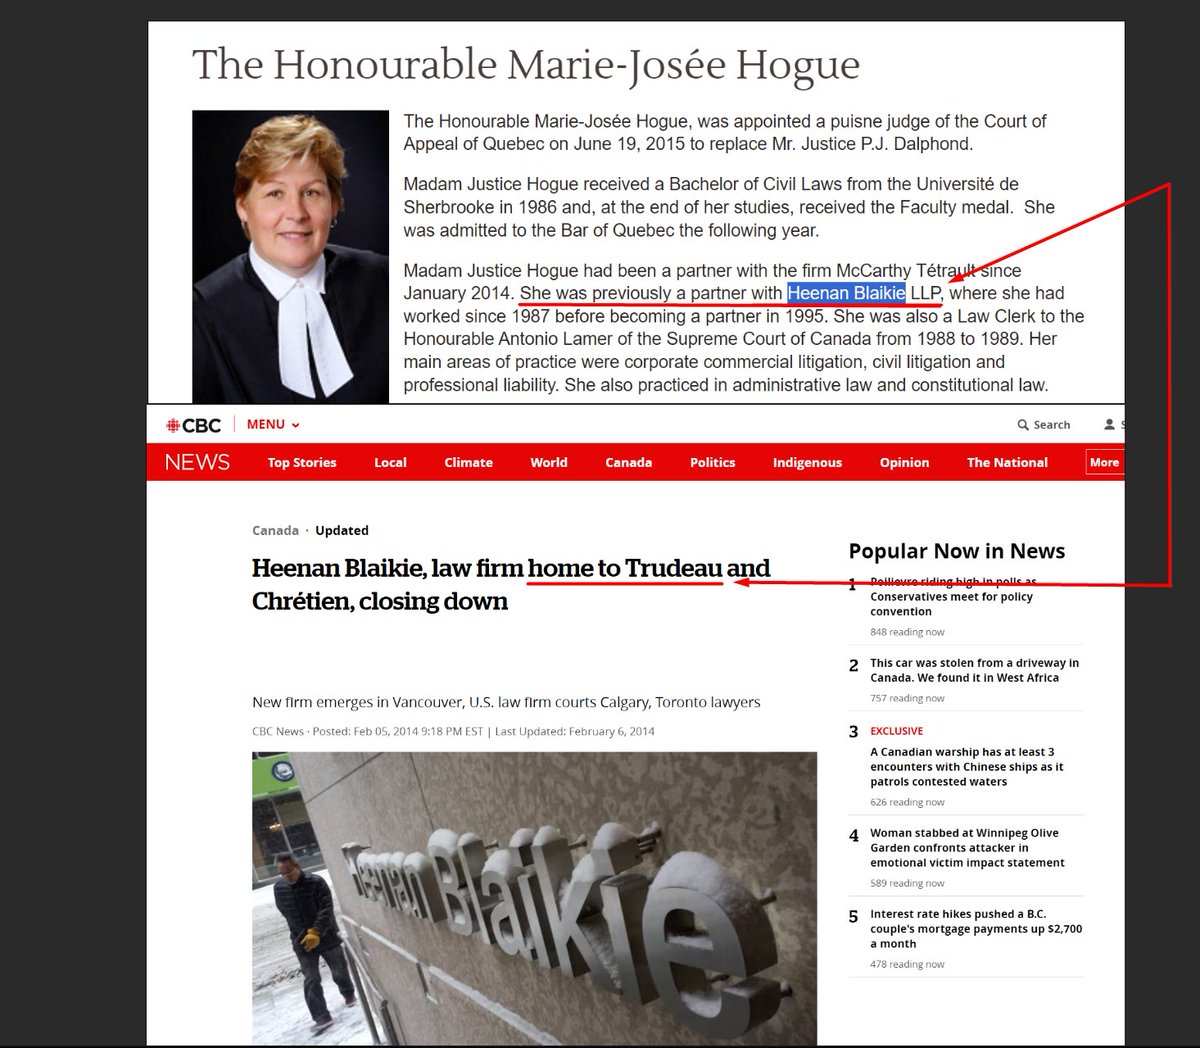 So they found a judge for foreign interference Marie-Josee Hogue who once again worked for a law firm that was home to the TRUDEAU's.....Unbelievable... Is no one going to address this? Was she on the board of the Trudeau Foundation also?